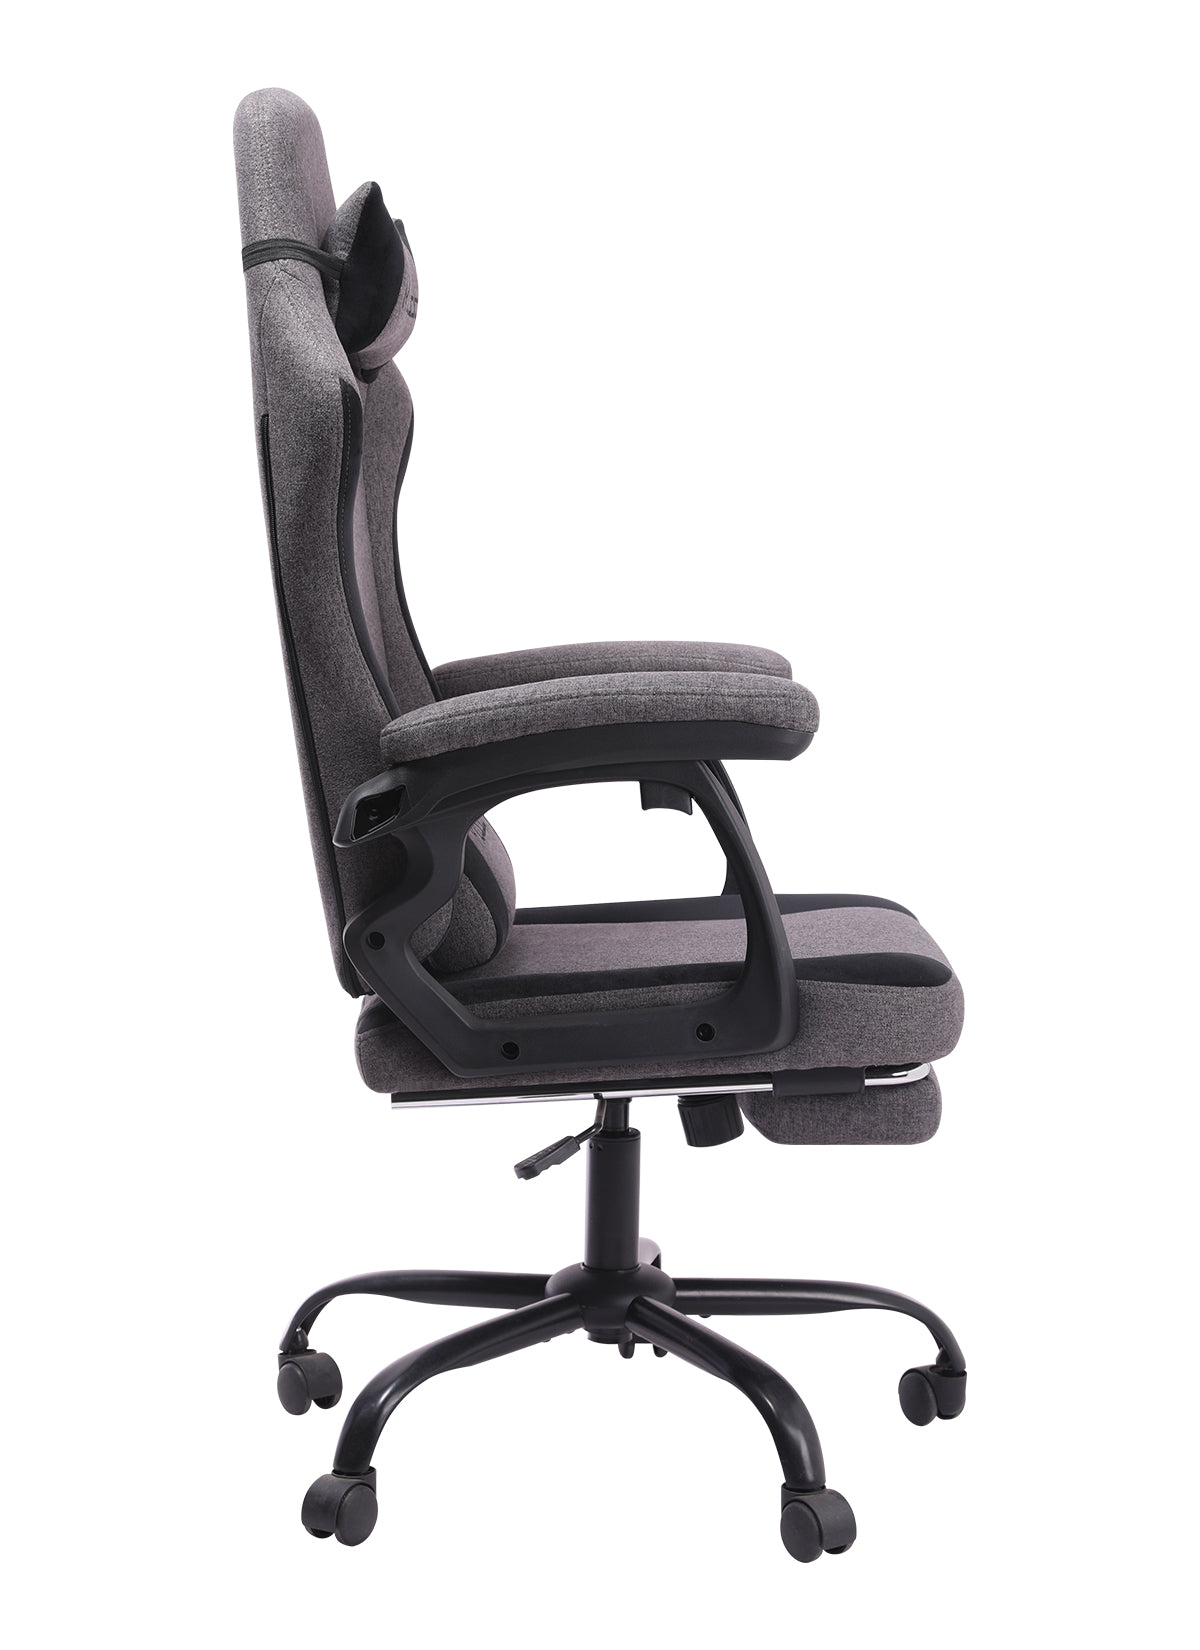 MUSSO Aeolus Series Fabric Computer Gaming Chair Navigator  With Footrest 109B-F L SIZE